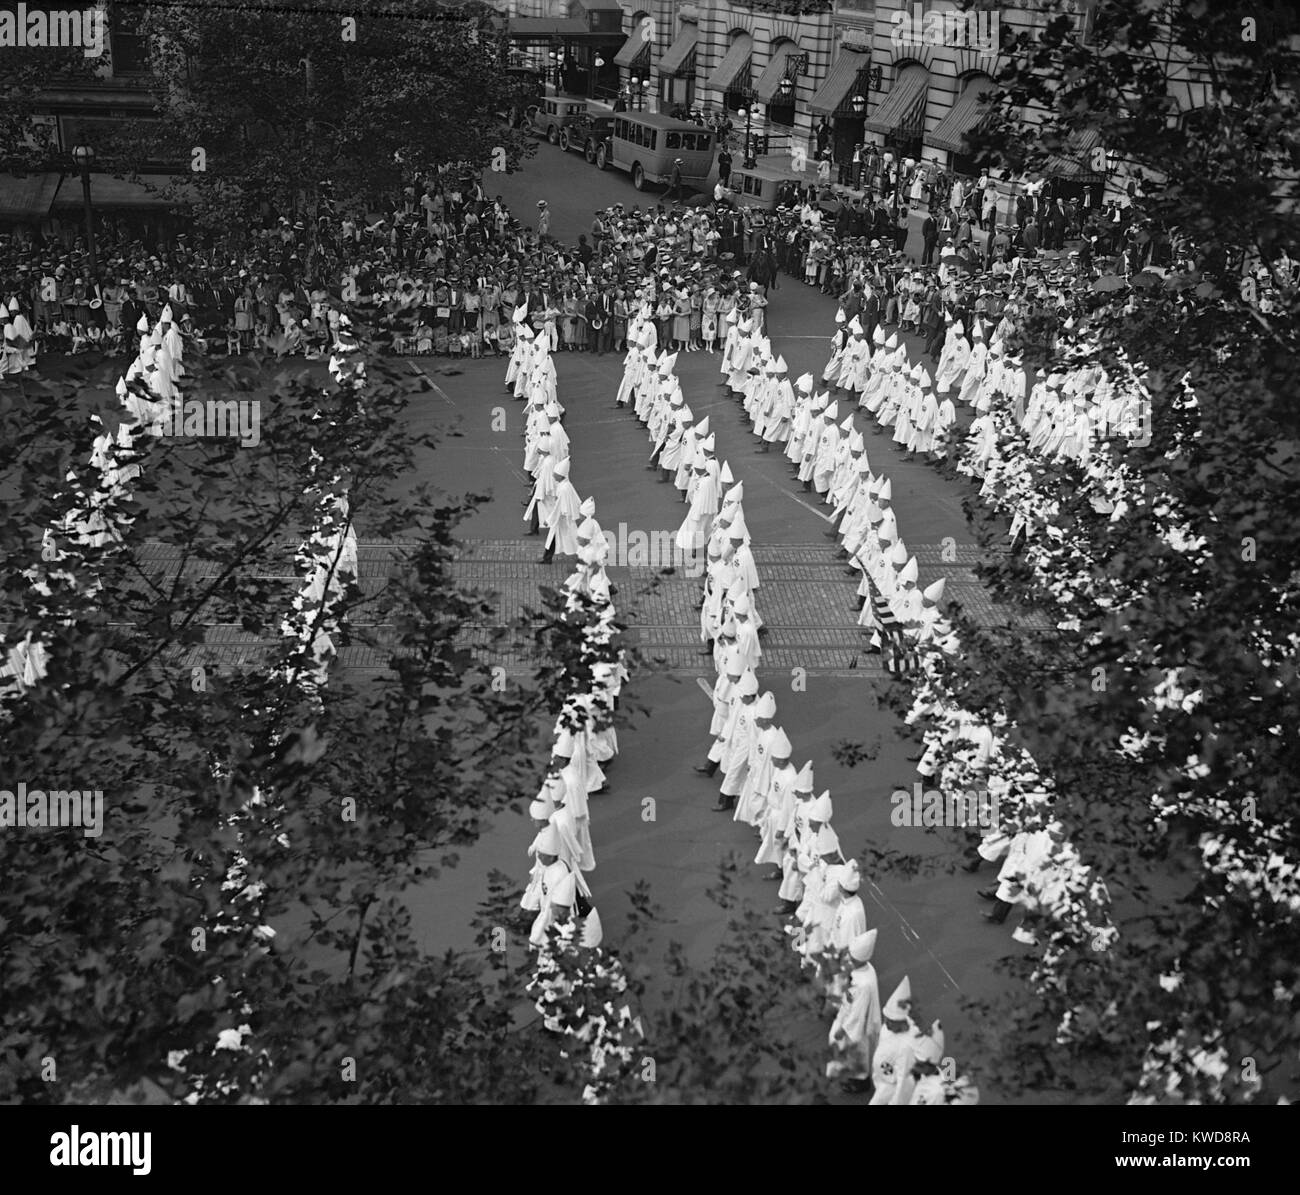 Rows of Ku Klux Klansmen march down Pennsylvania Avenue on August 8, 1925. They were among the 25,000 to 35,000 who marched unmasked in Washington, D.C. (BSLOC 2015 16 181) Stock Photo